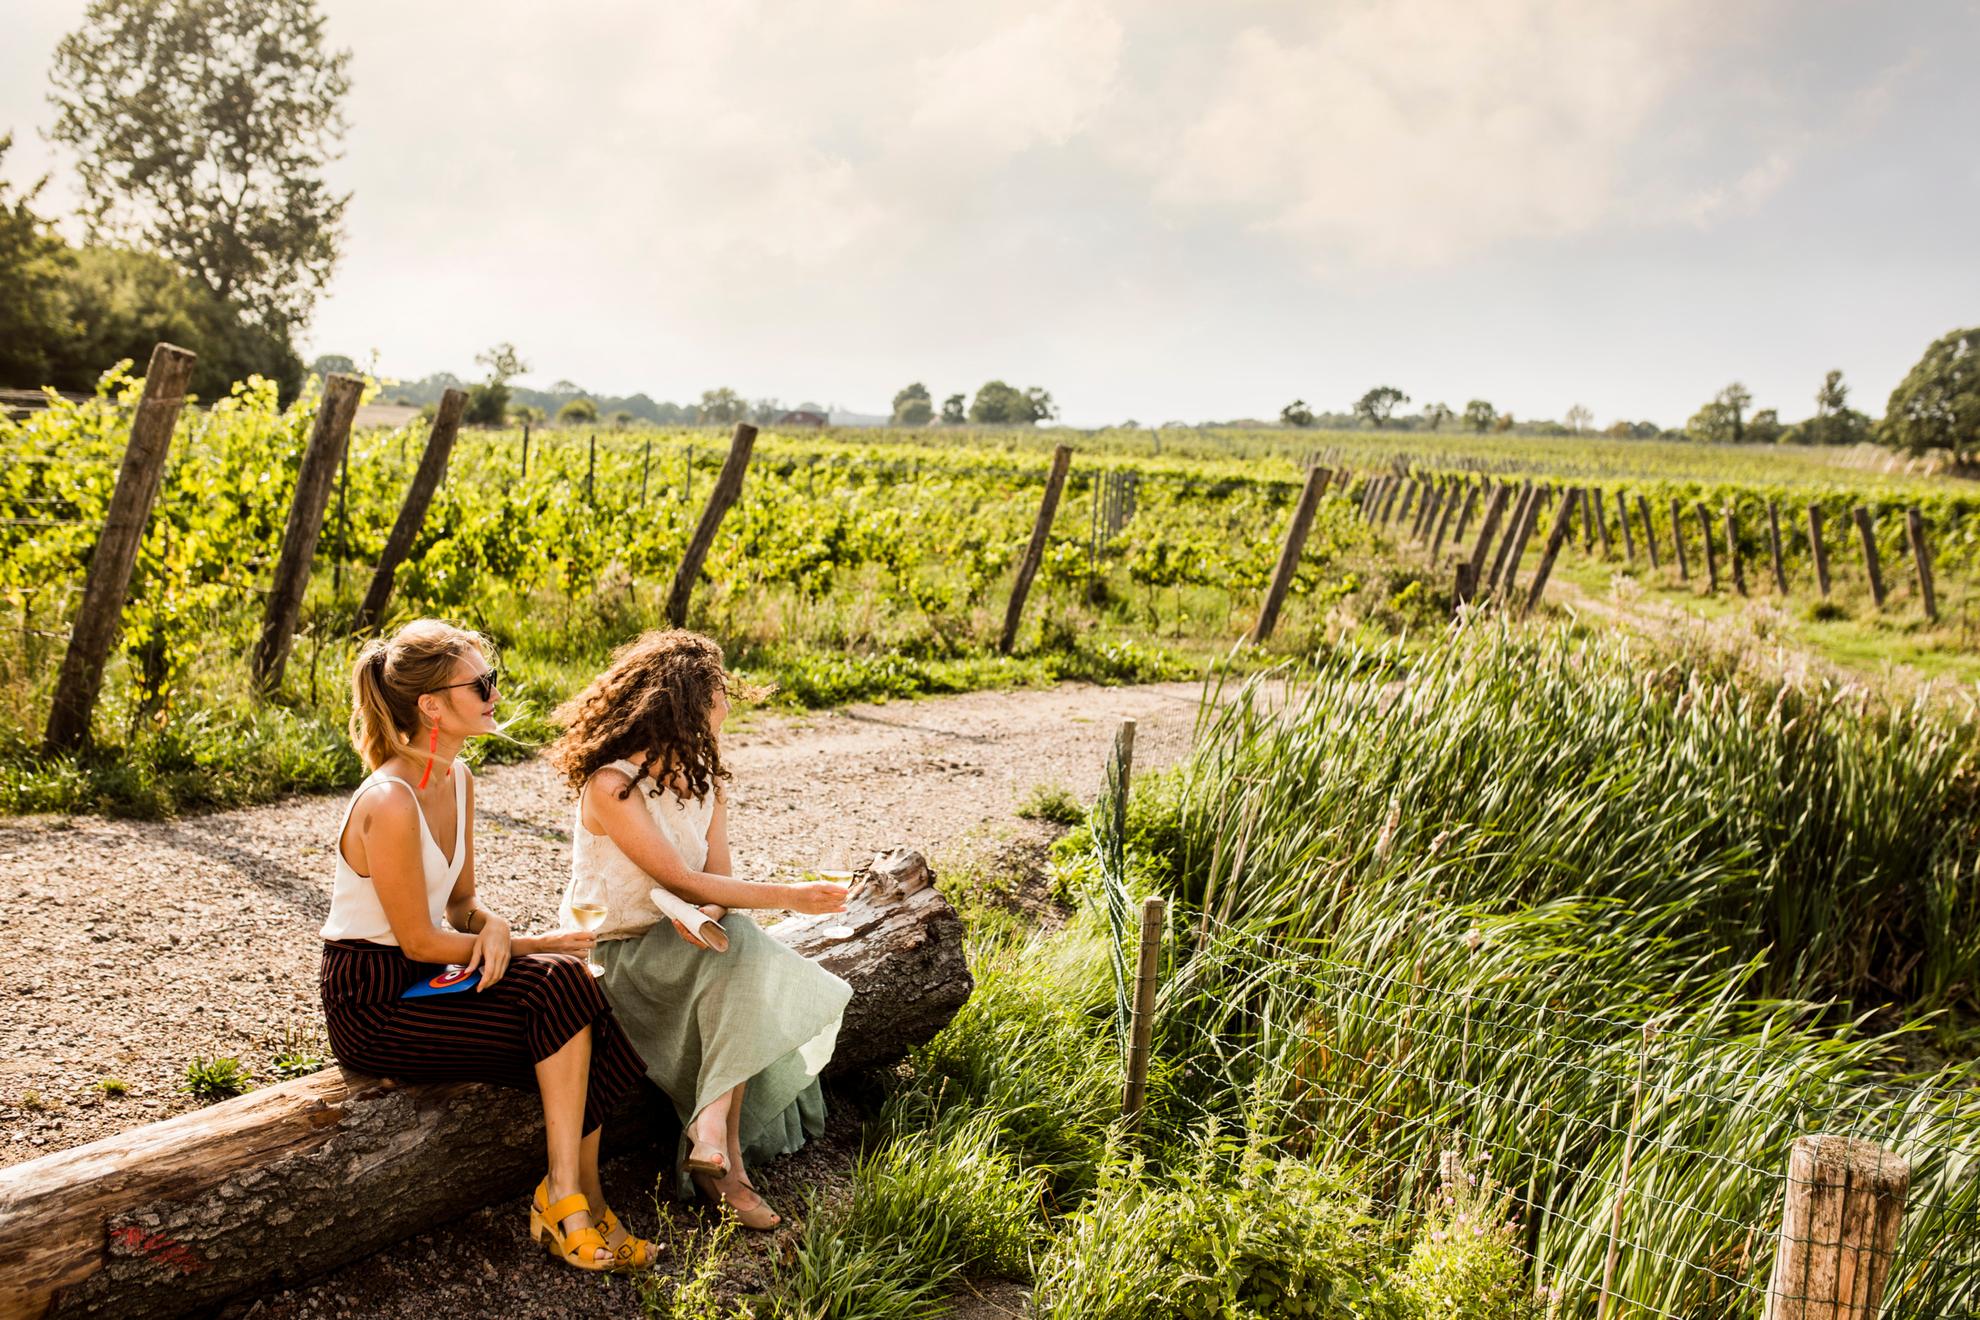 Two women are sitting outdoors next to a vineyard. The sun is shining, and the vines are green.